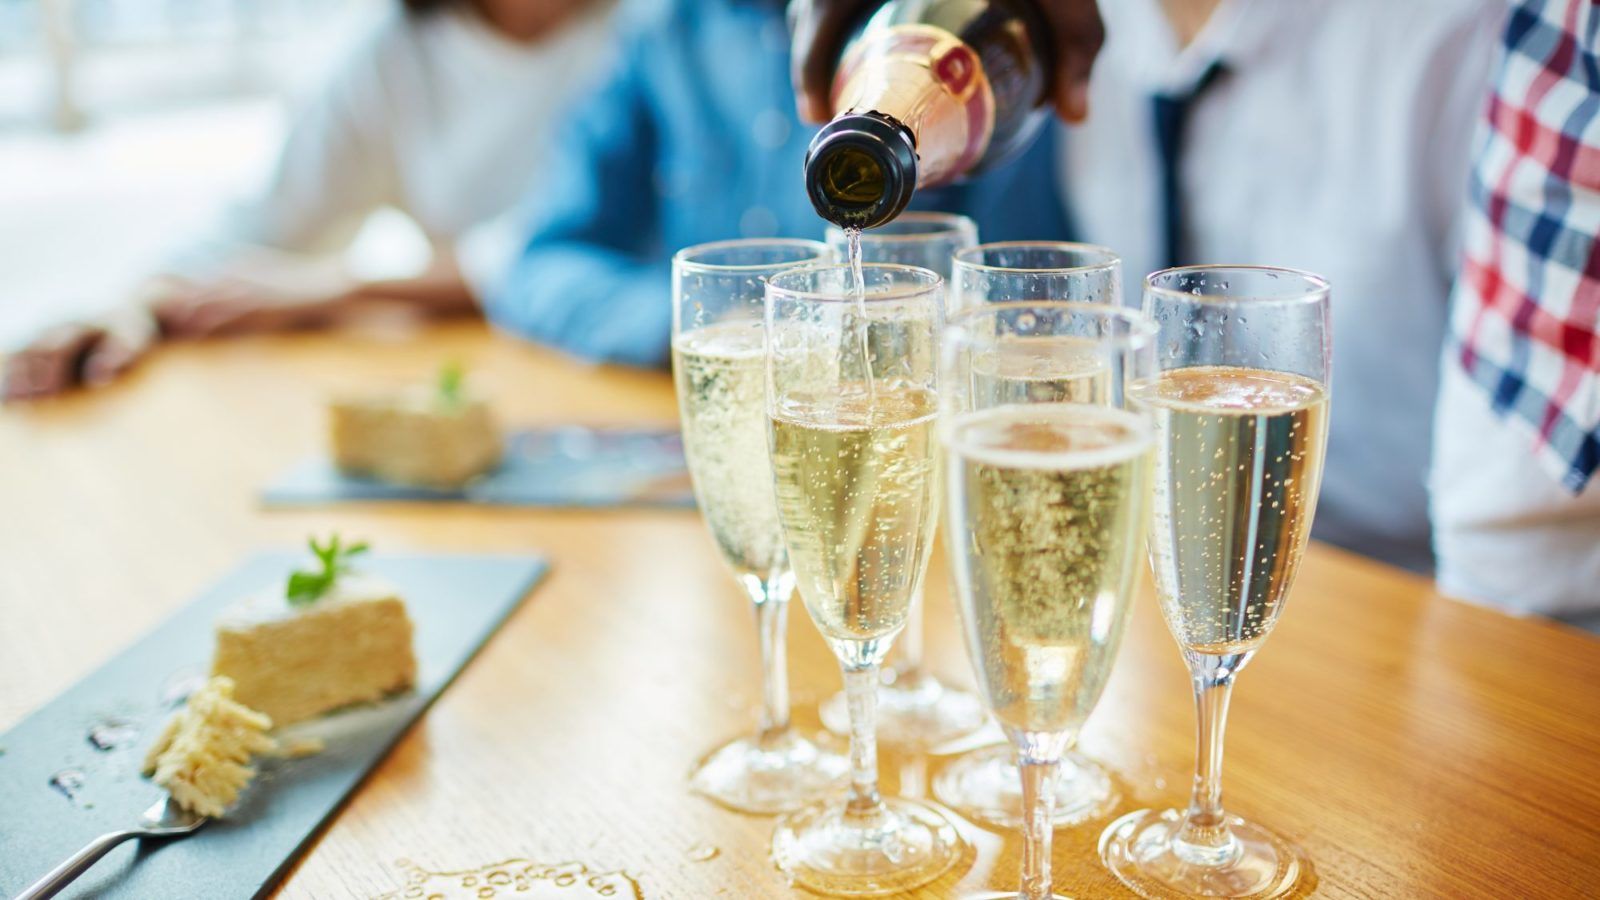 The world bought a record HK$48 billion worth of Champagne last year